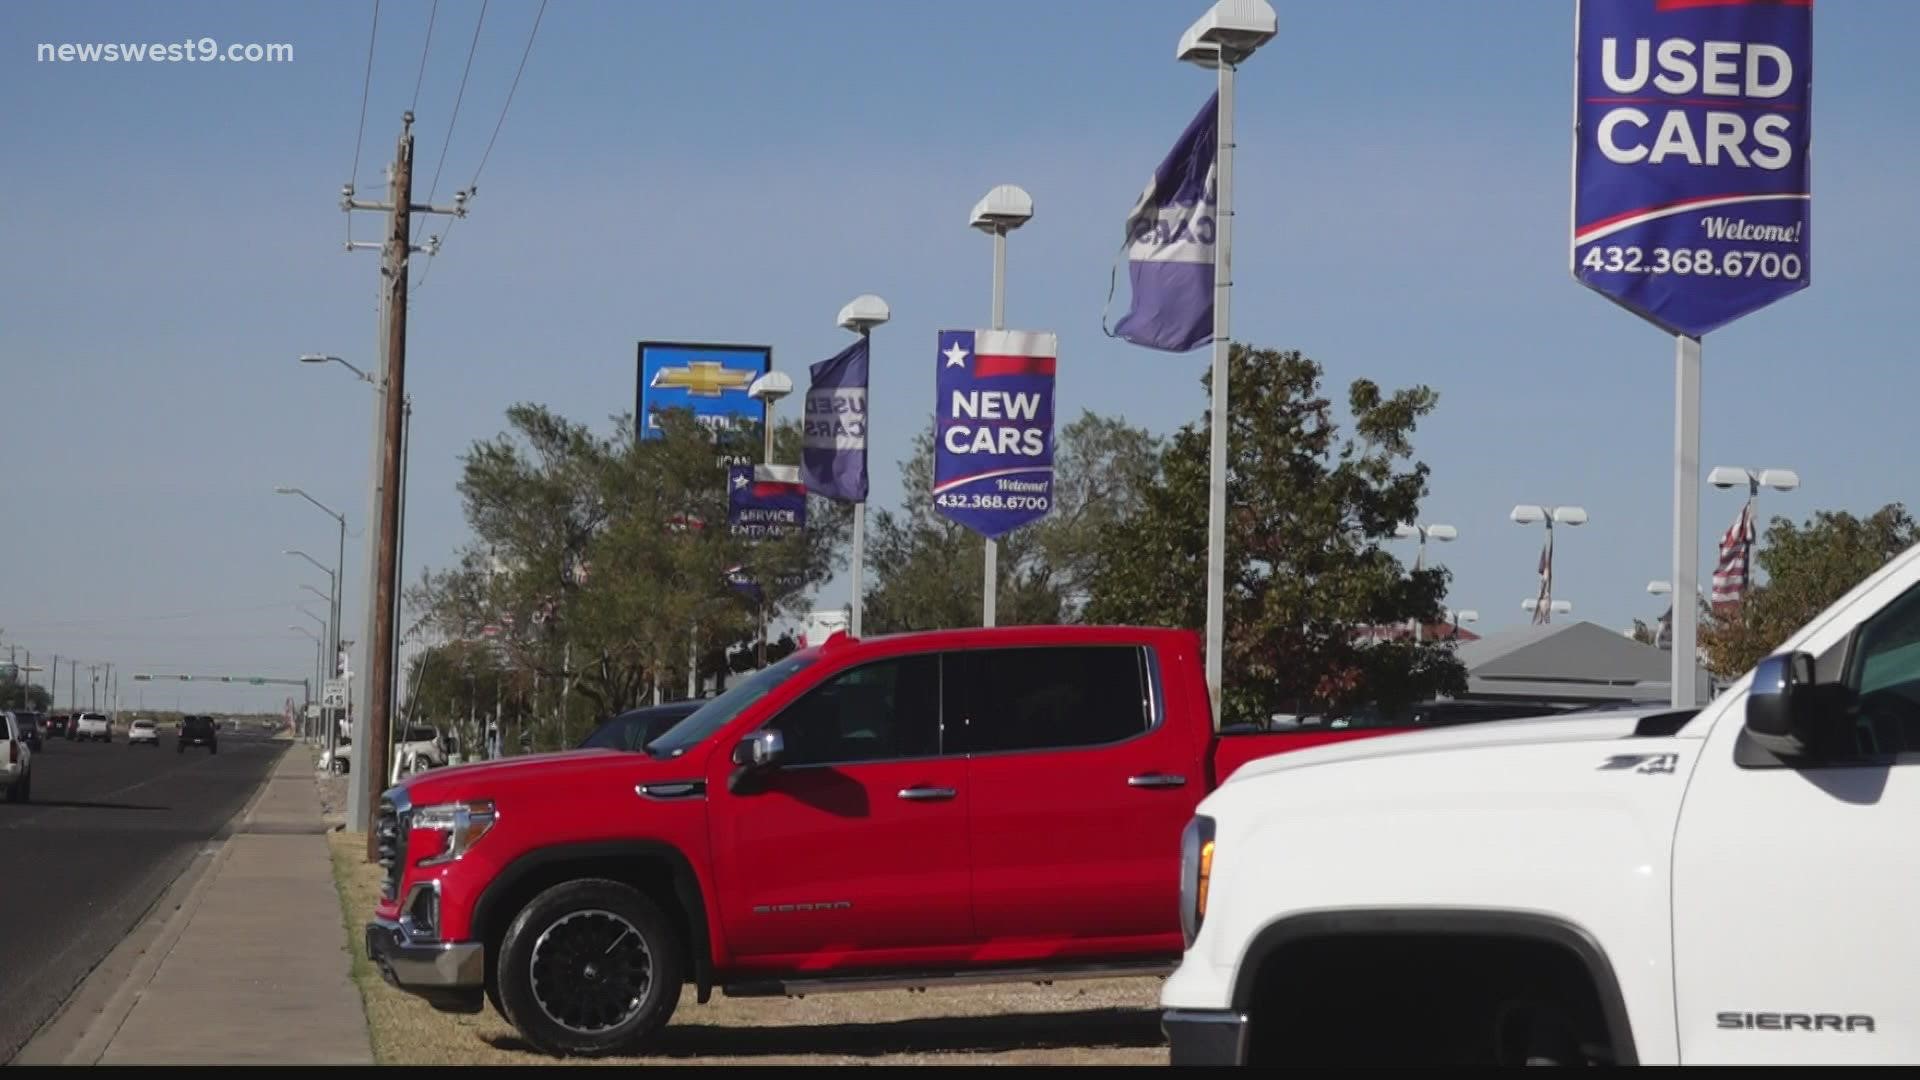 NewsWest 9 spoke to an Odessa car dealership to find out more about the problems being caused by the chip shortage.